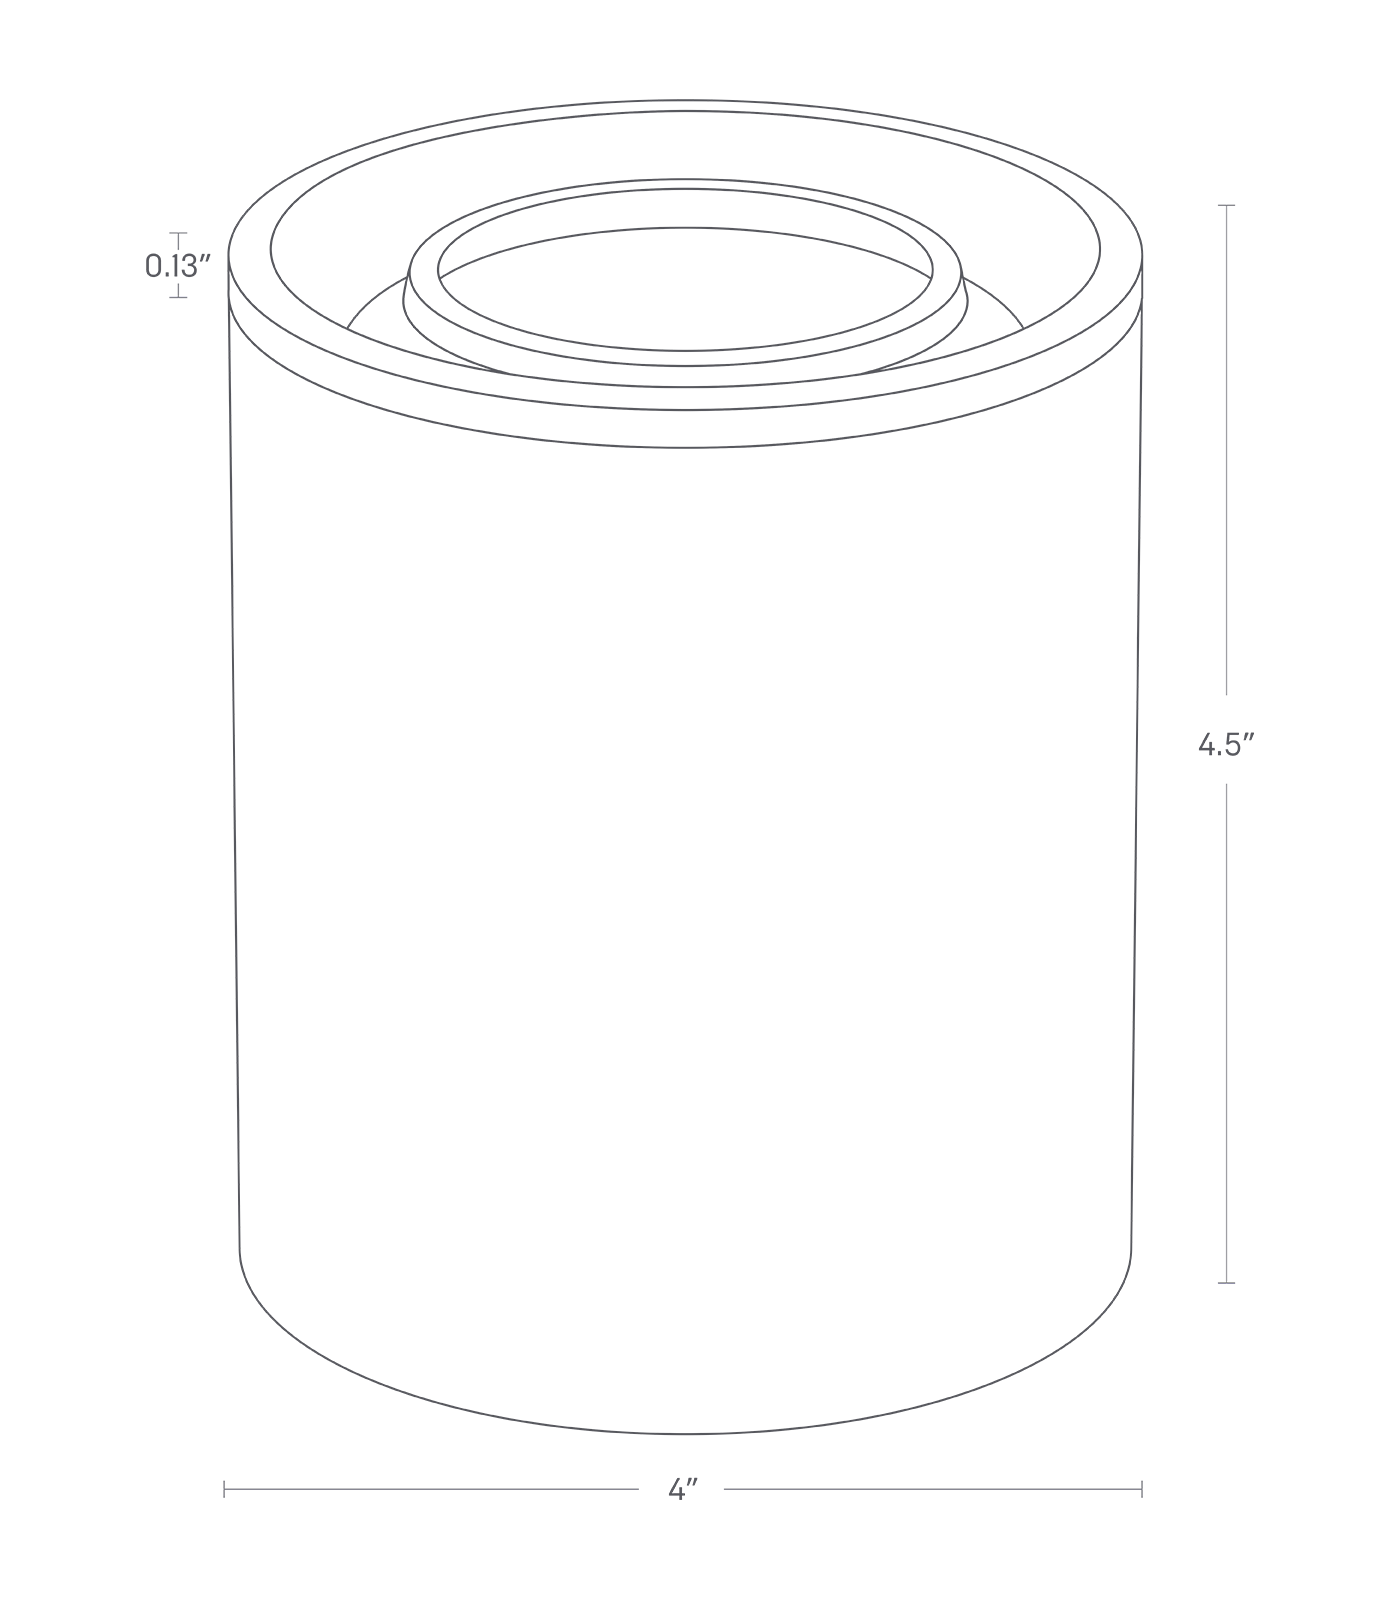 Dimension Image for Ceramic Canister on a white background showing height of 4.5